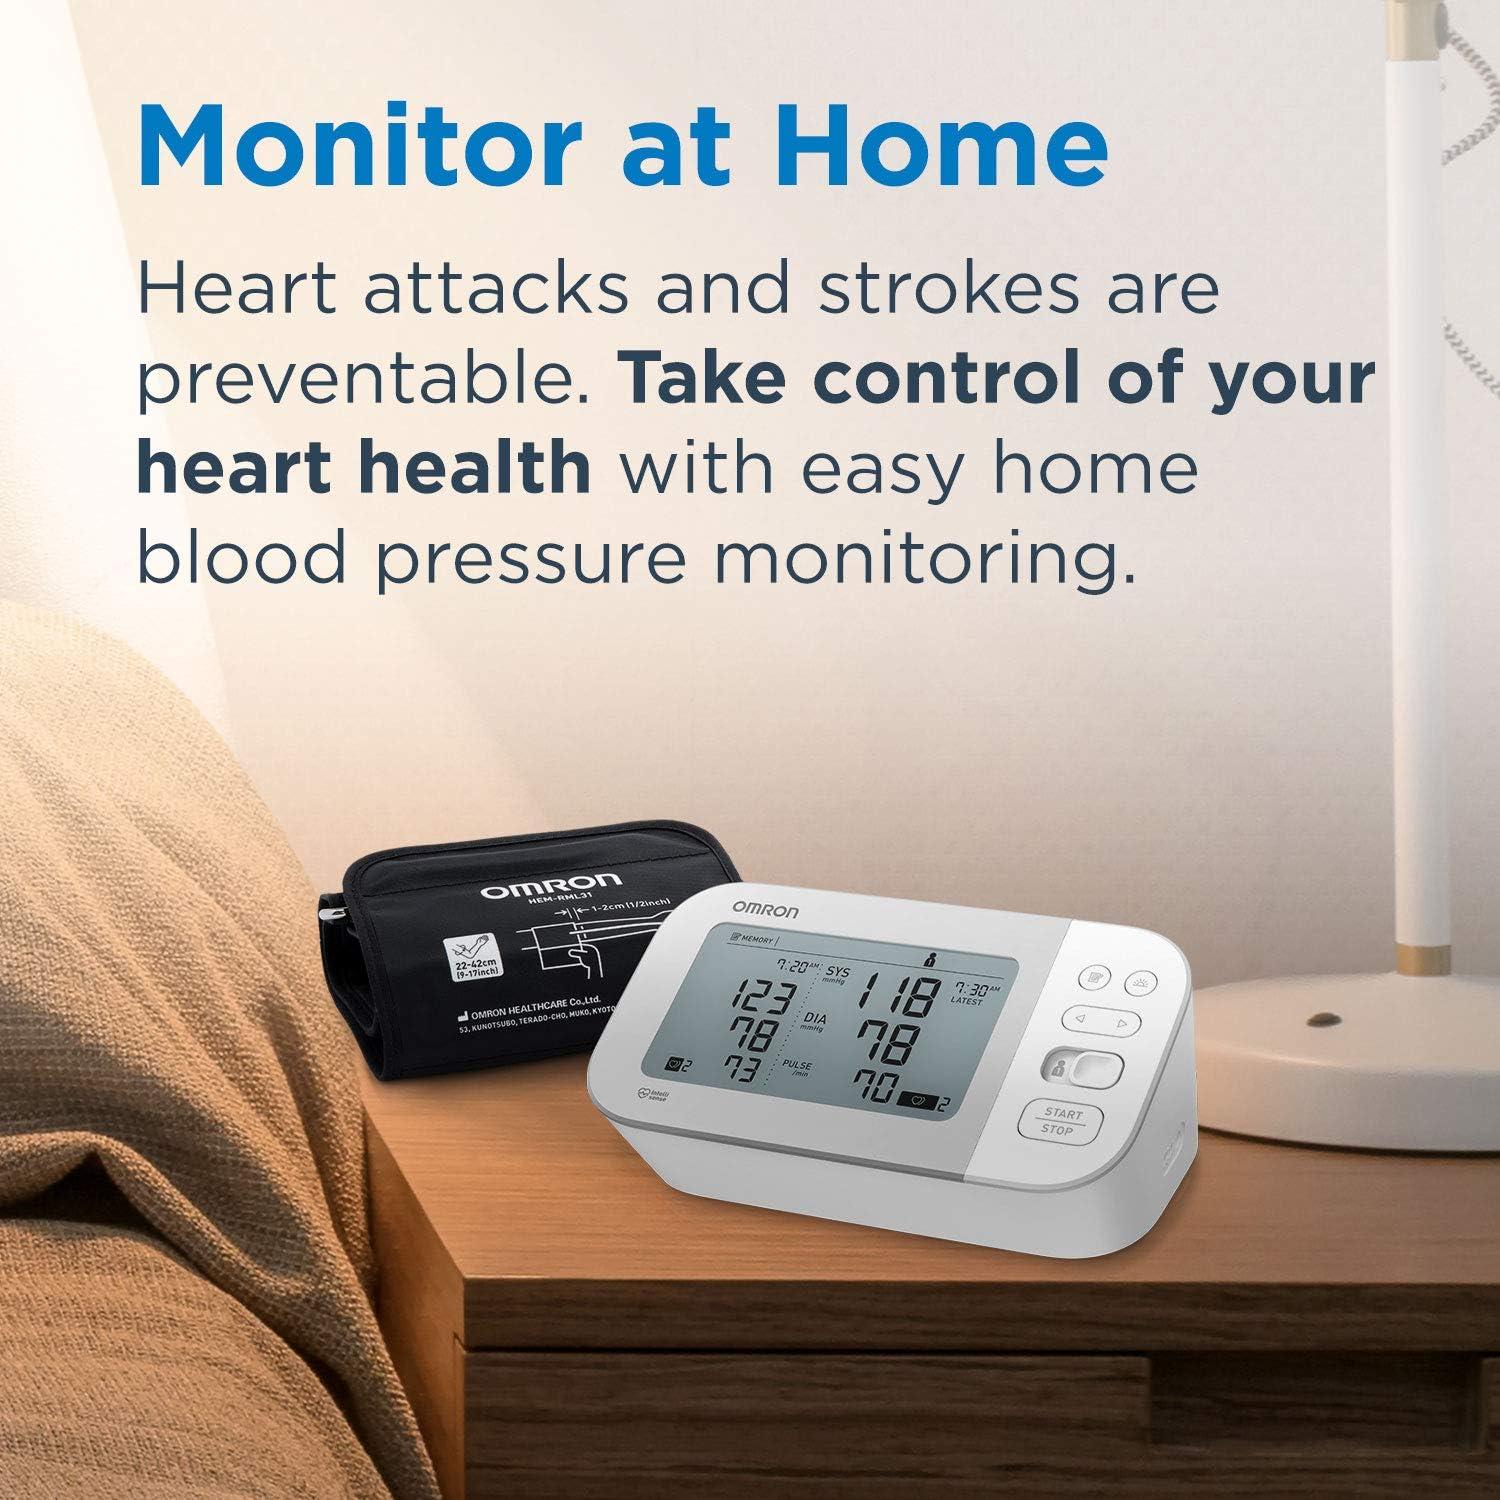 Omron Blood Pressure Monitor - 10 series for Sale in Mountain View